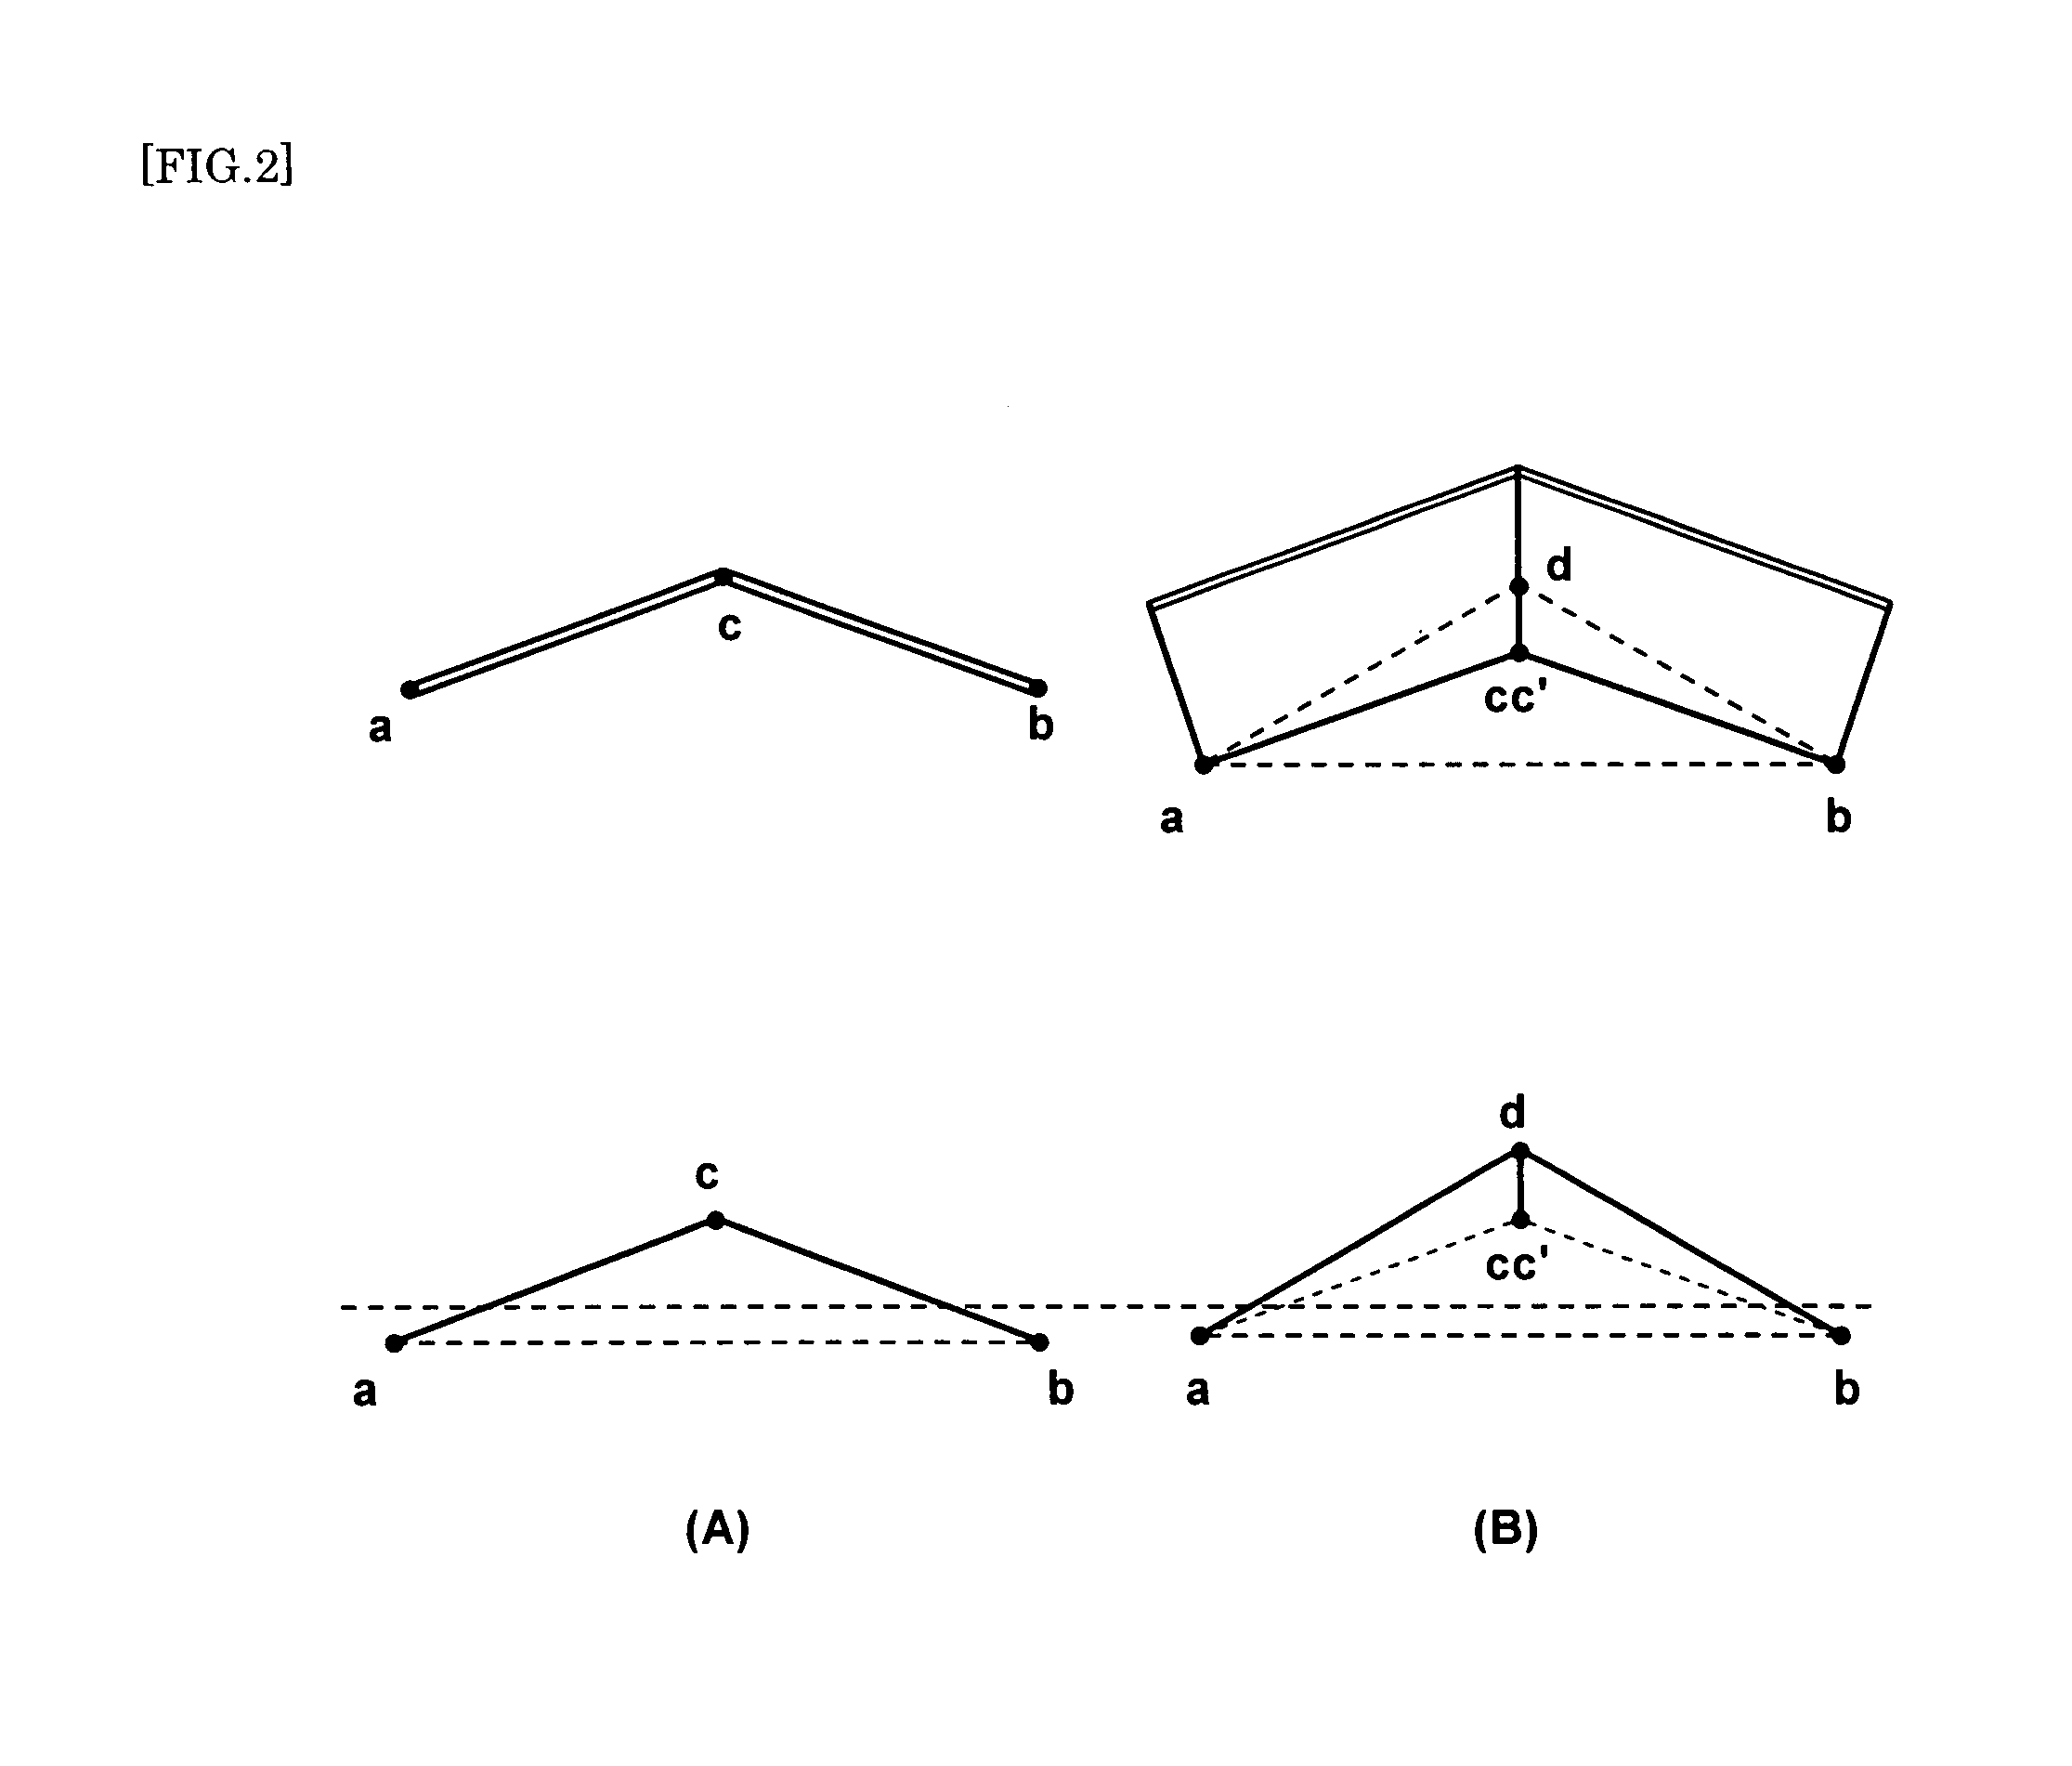 Self-standing flat plate-like article and methods of exhibiting and manufacturing the same